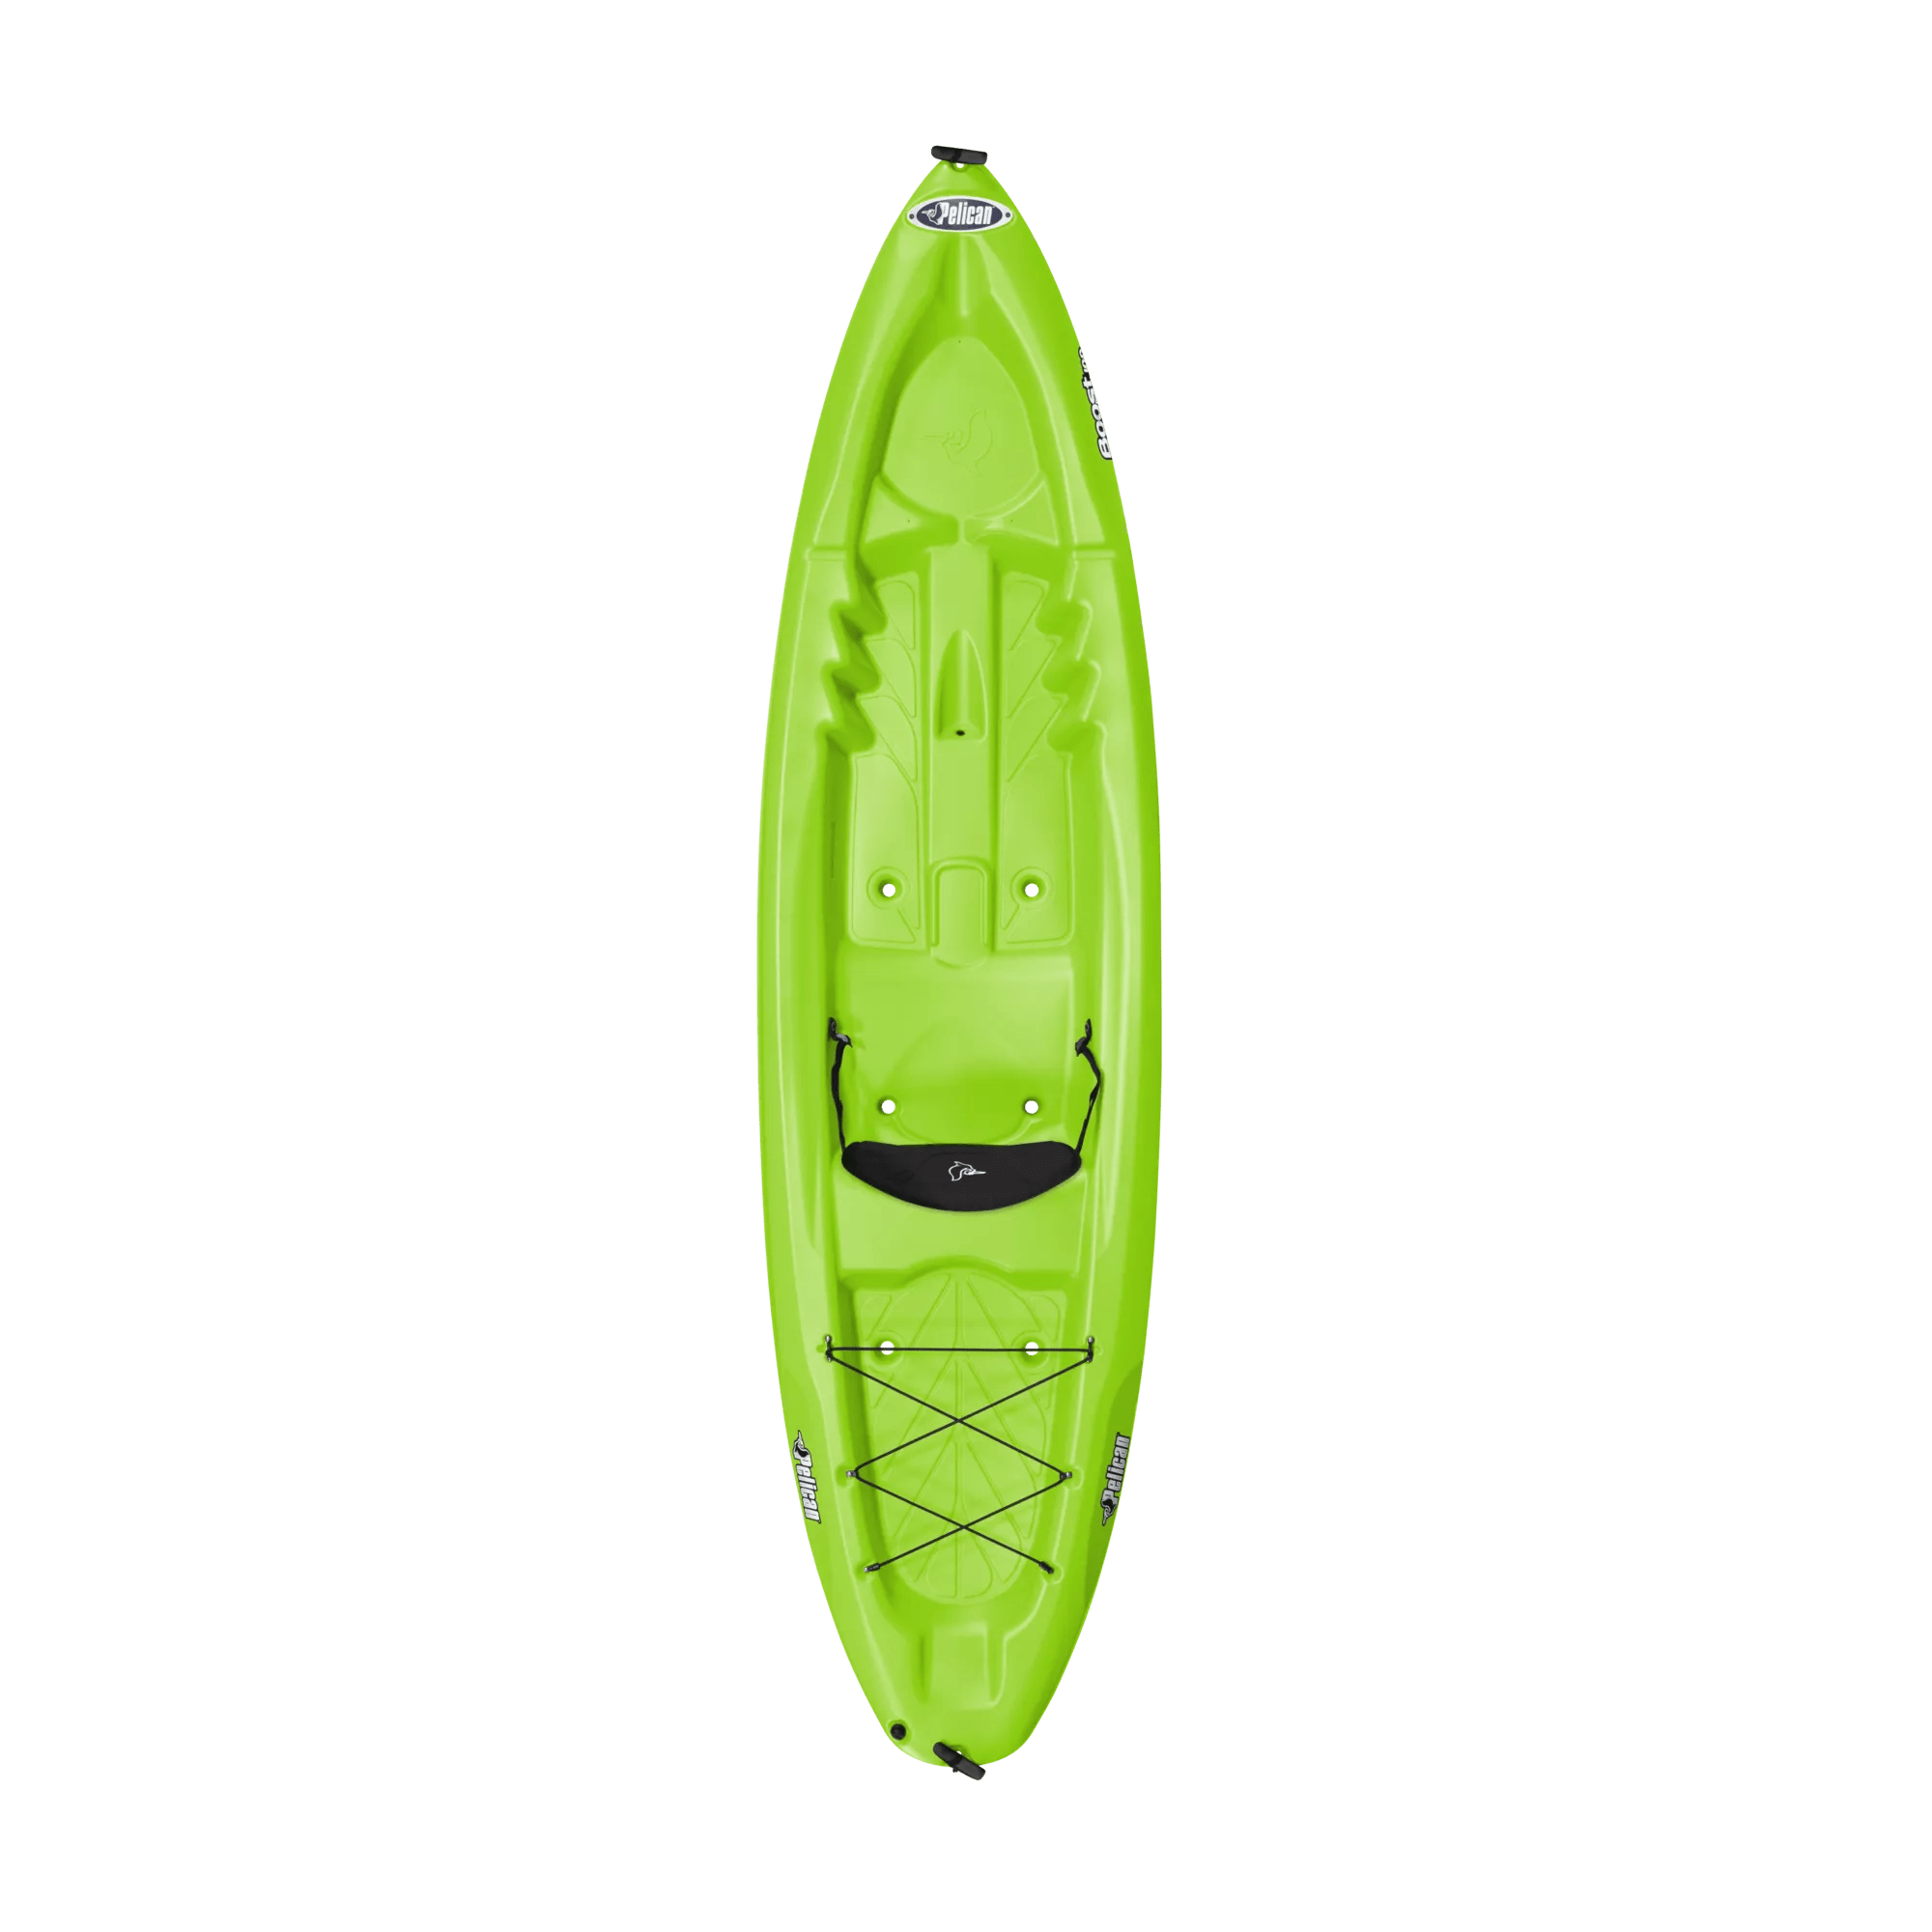 Kayak Pelican Catch Classic 100 Cosmos - Nootica - Water addicts, like you!